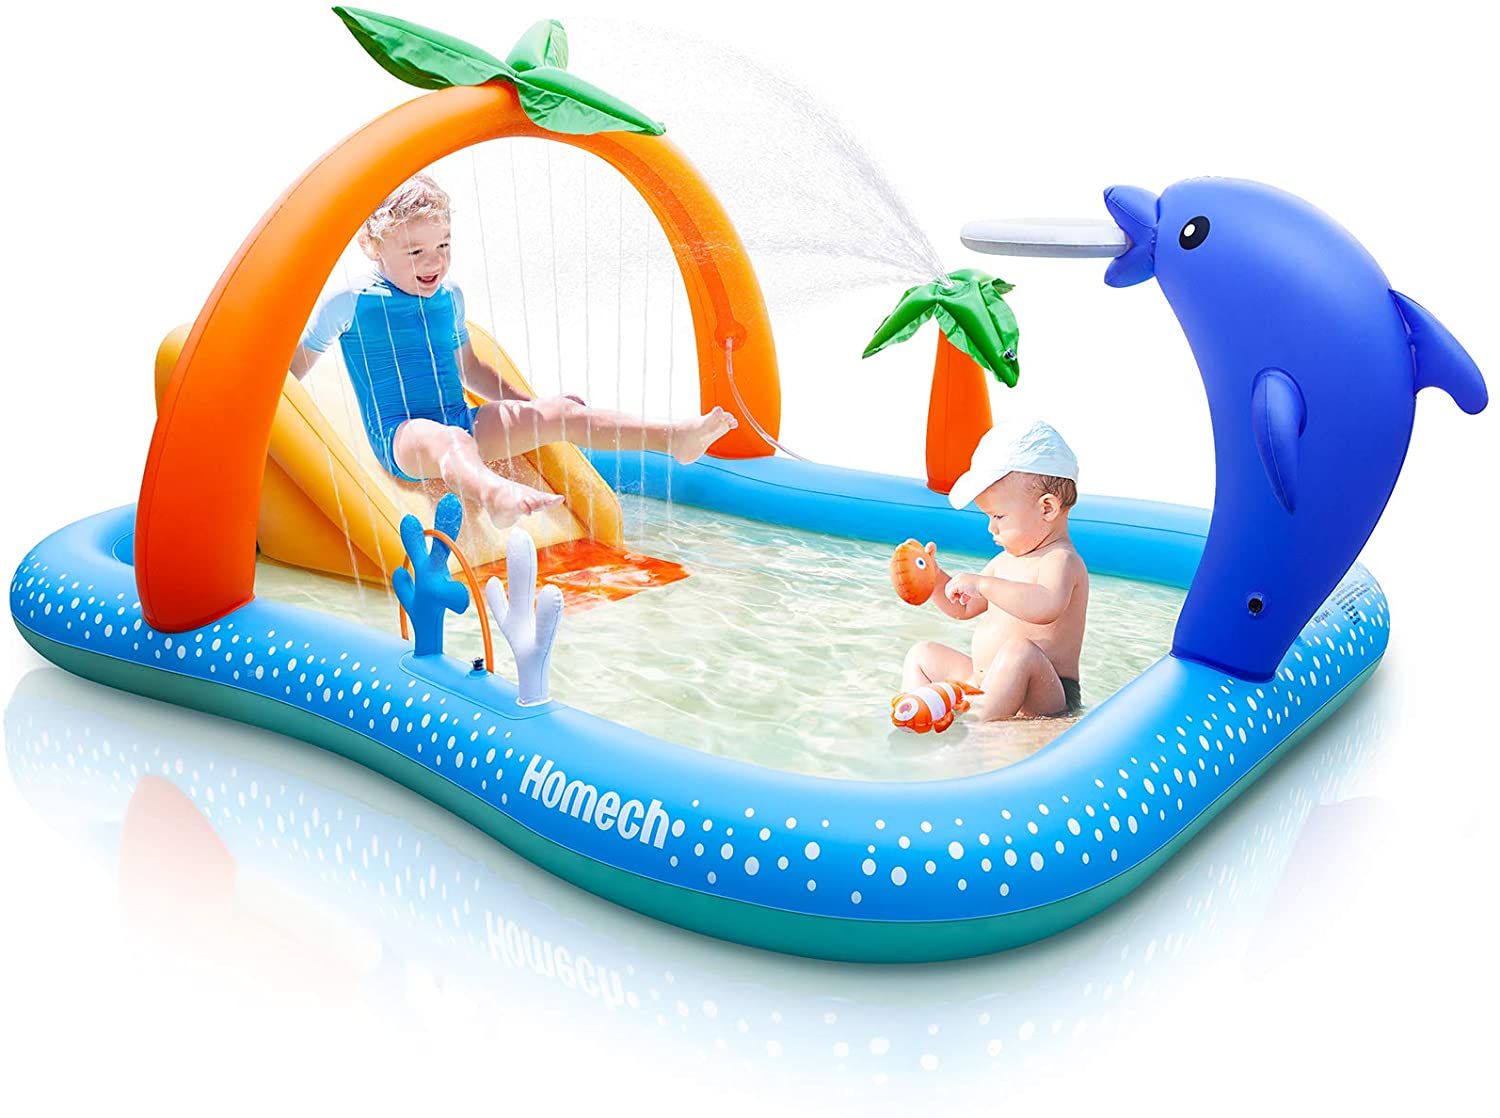 Homech Inflatable Play Center Pool